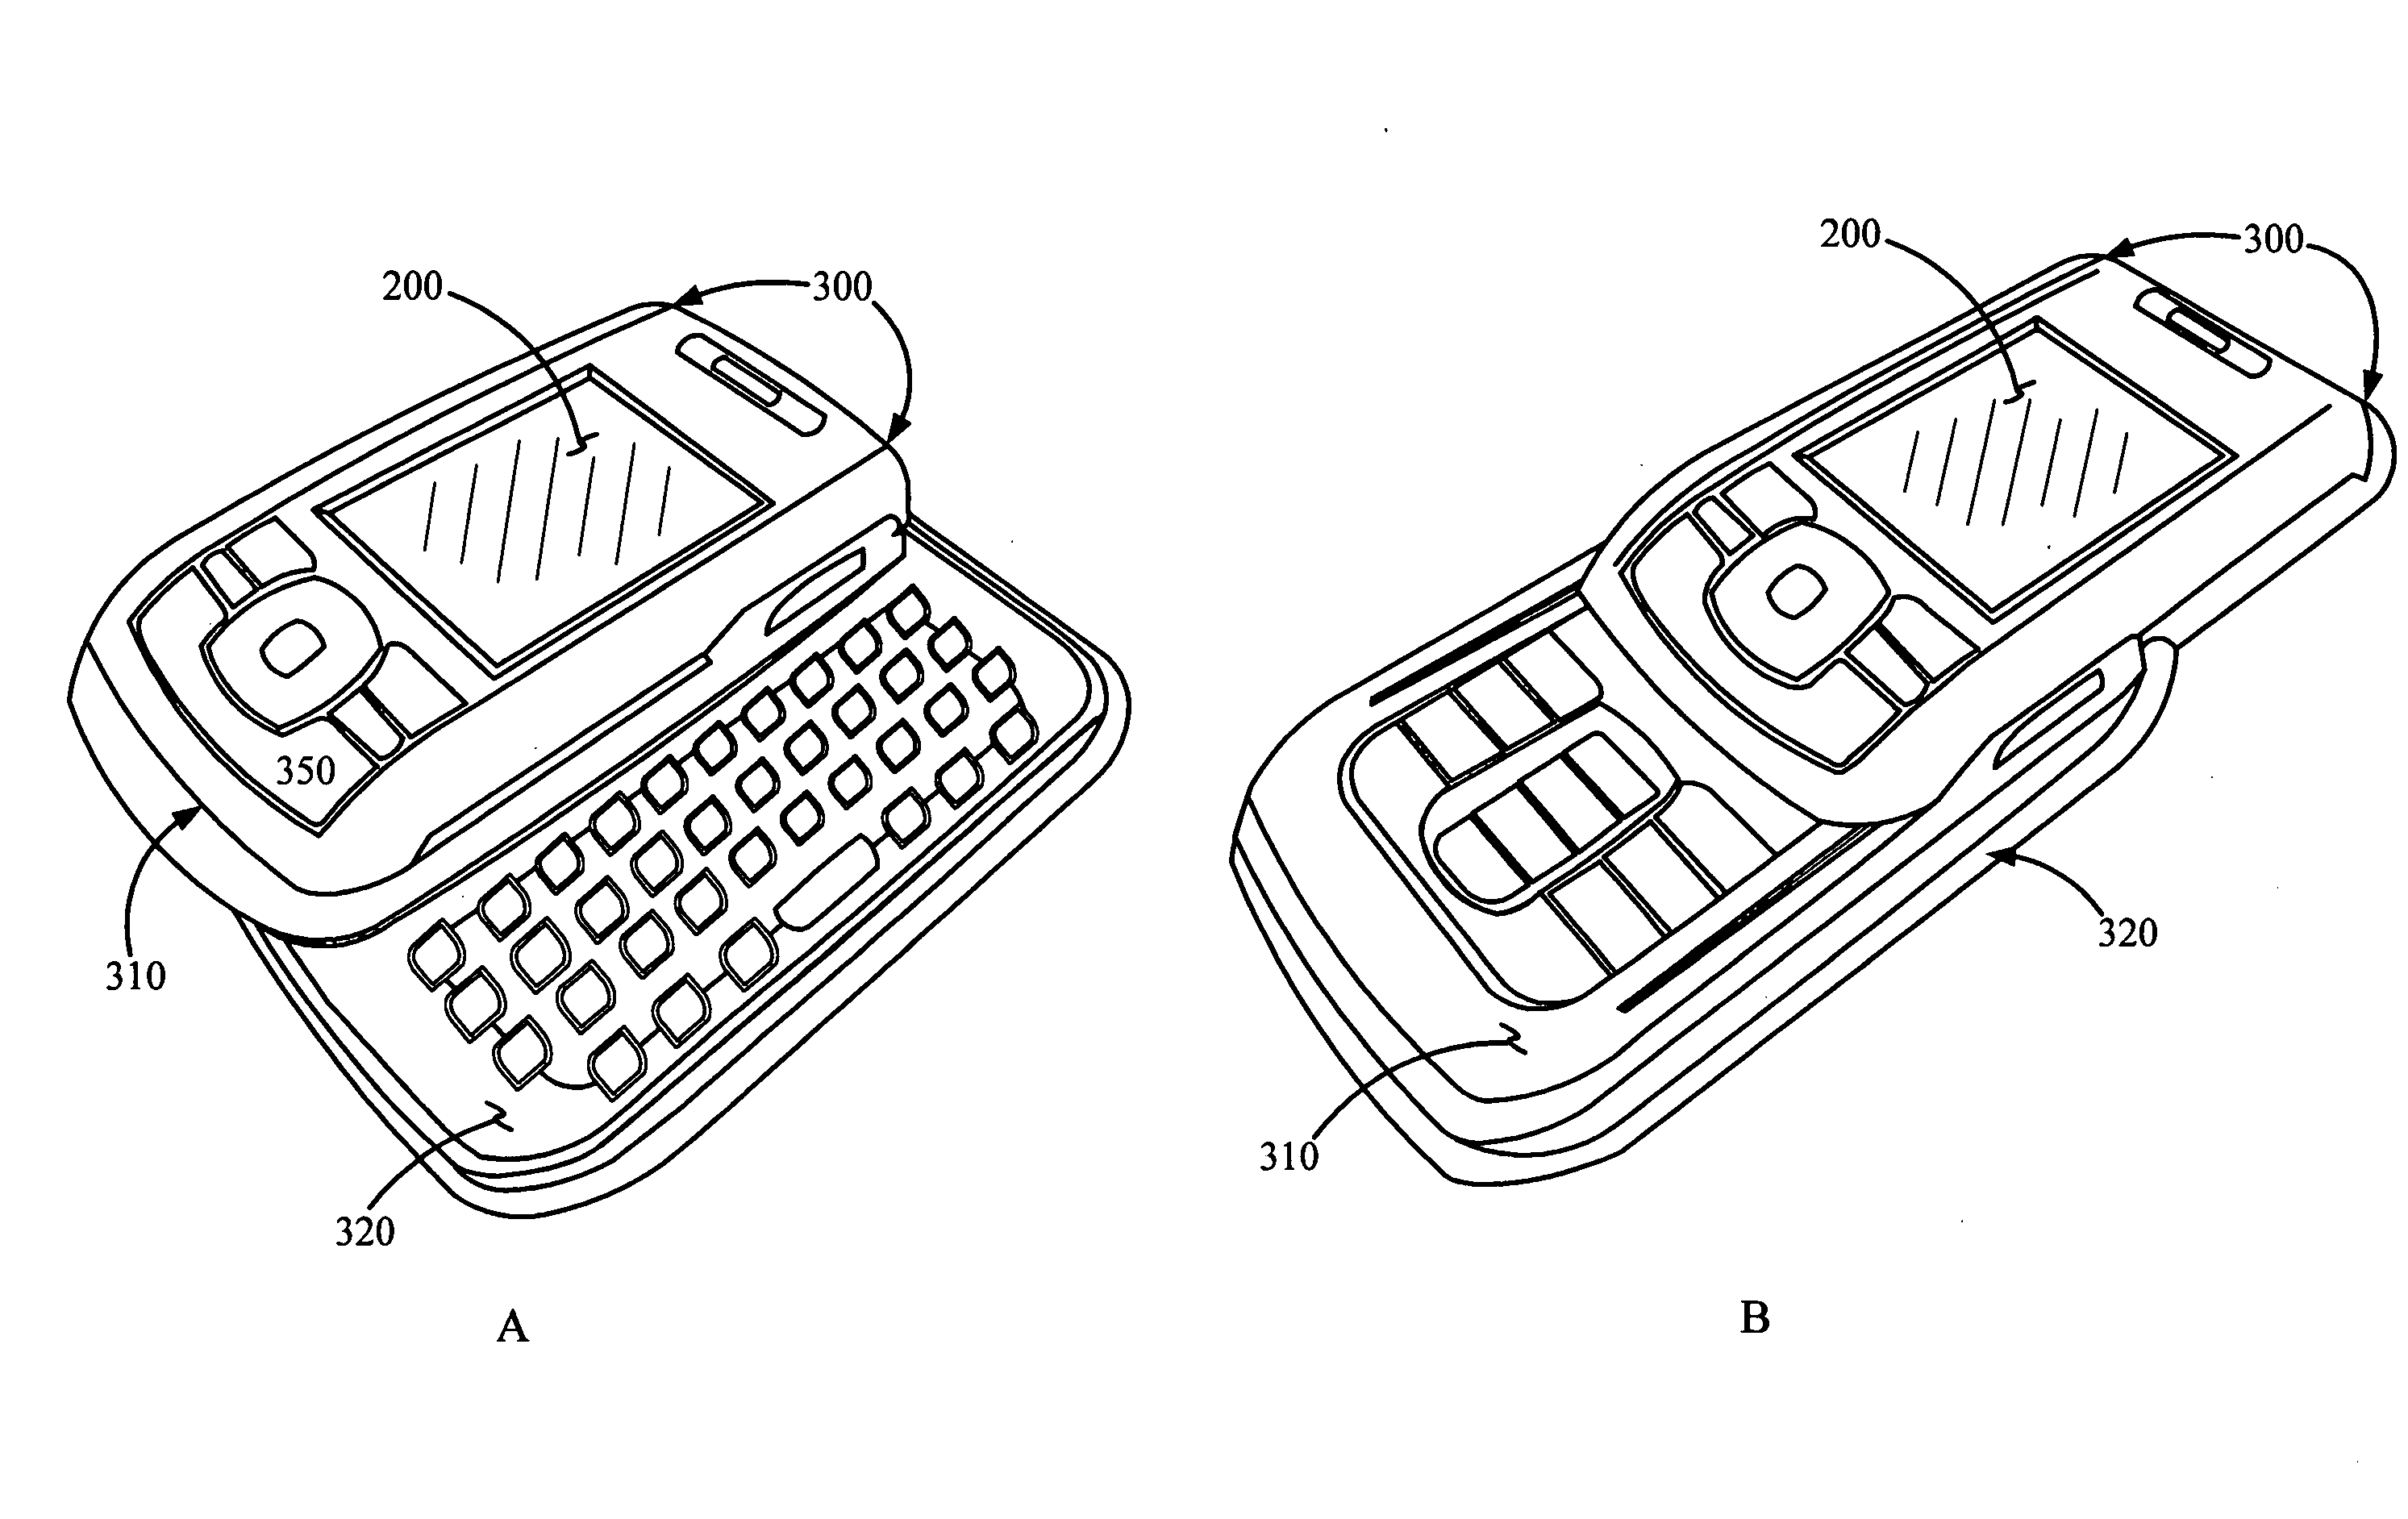 Portable device with versatile keyboard